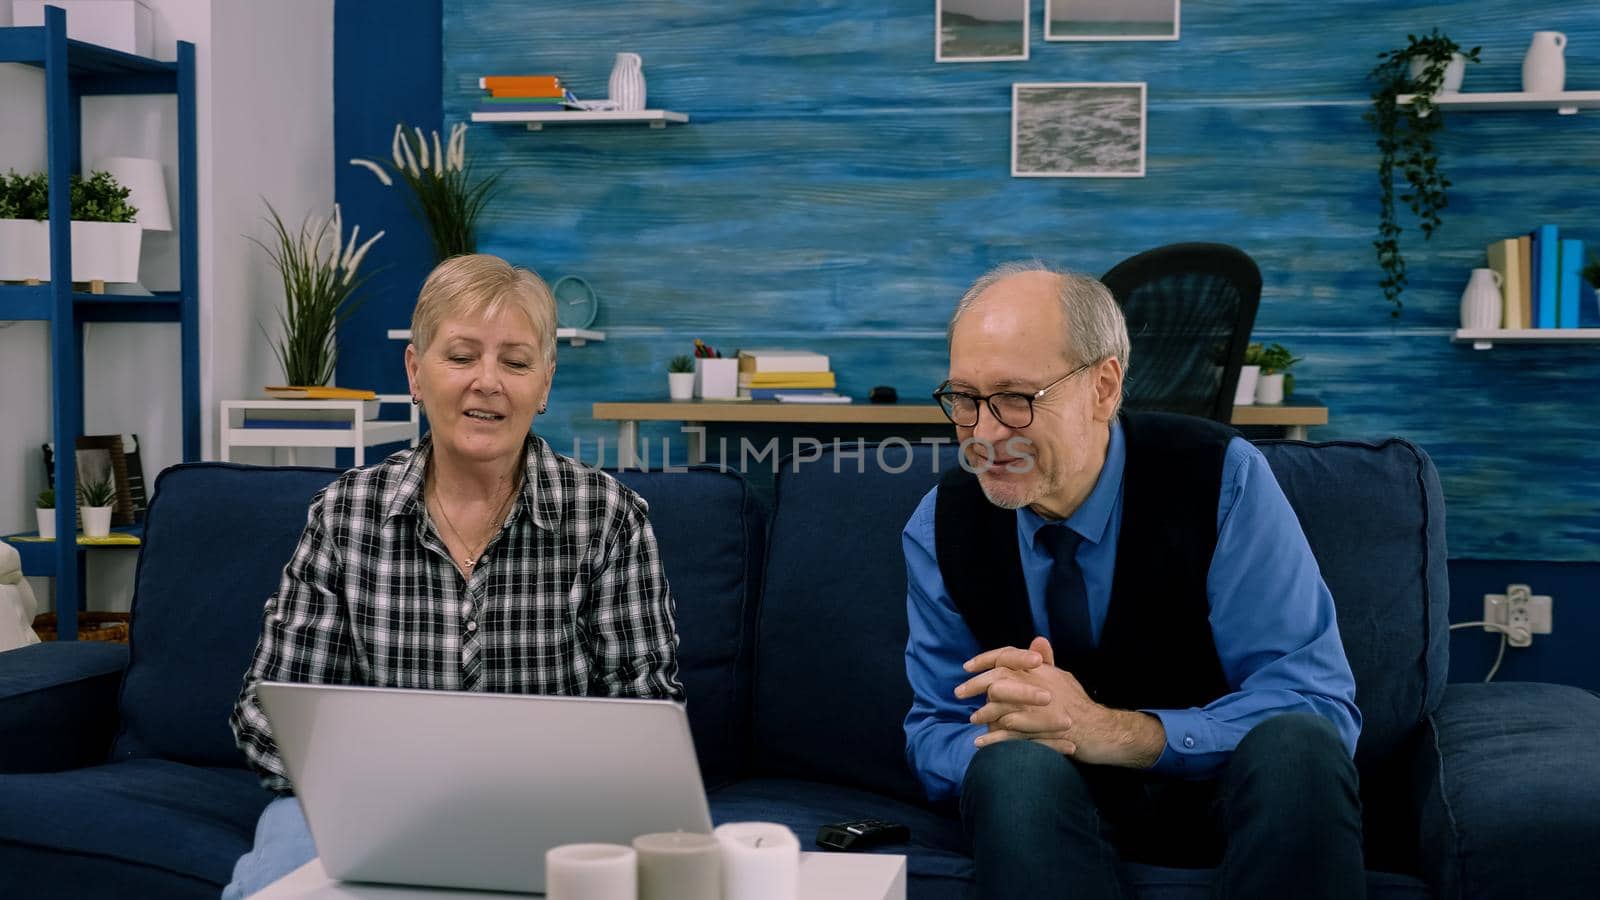 Elderly age couple sitting on sofa waving at camera during videocall by DCStudio